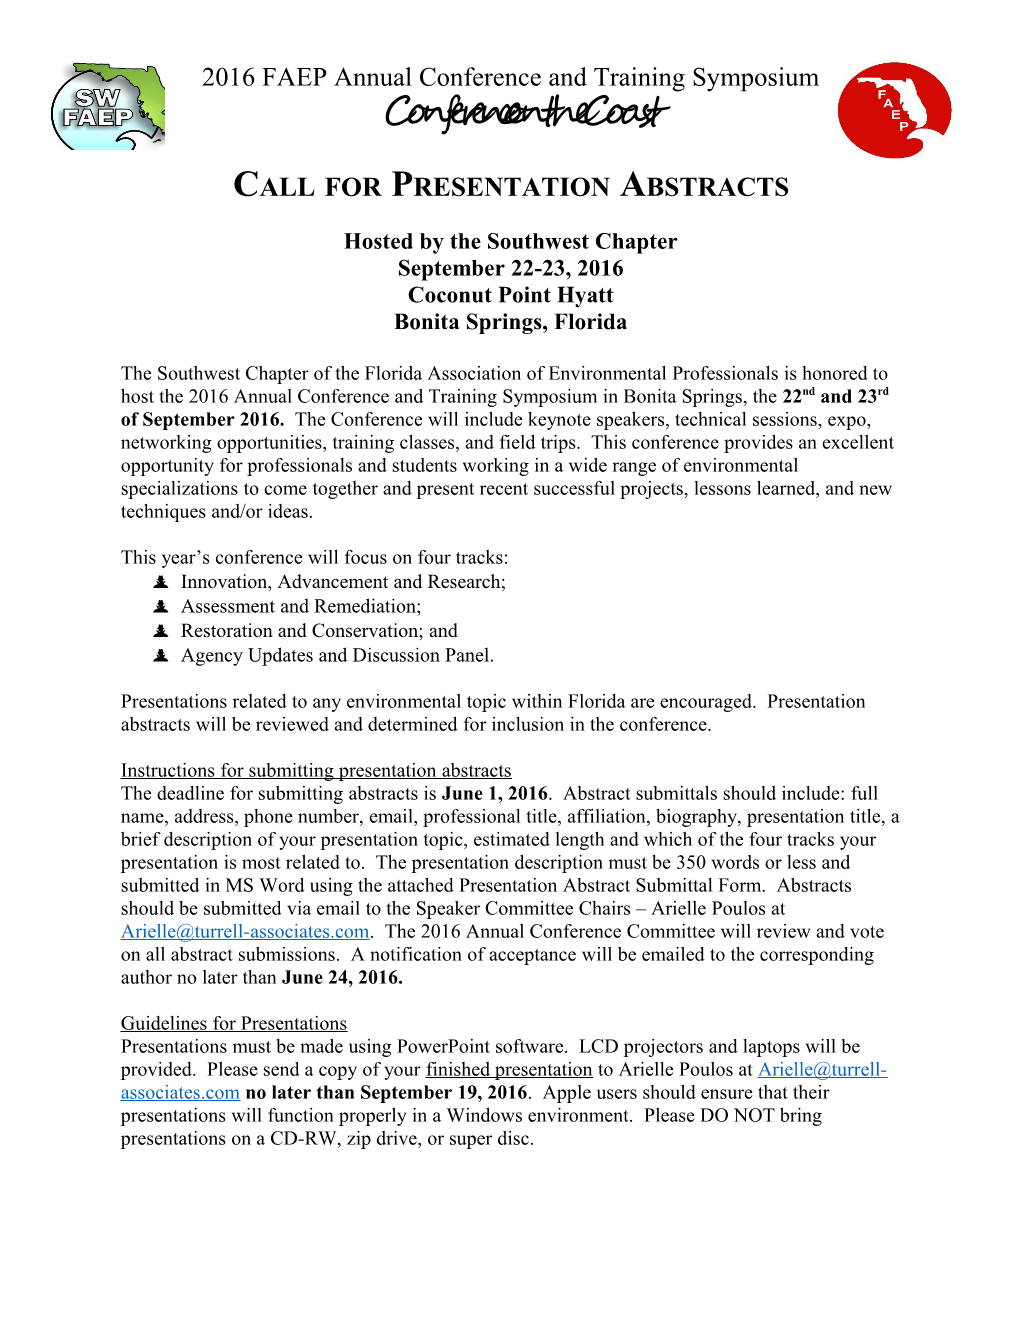 Call for Presentation Abstracts